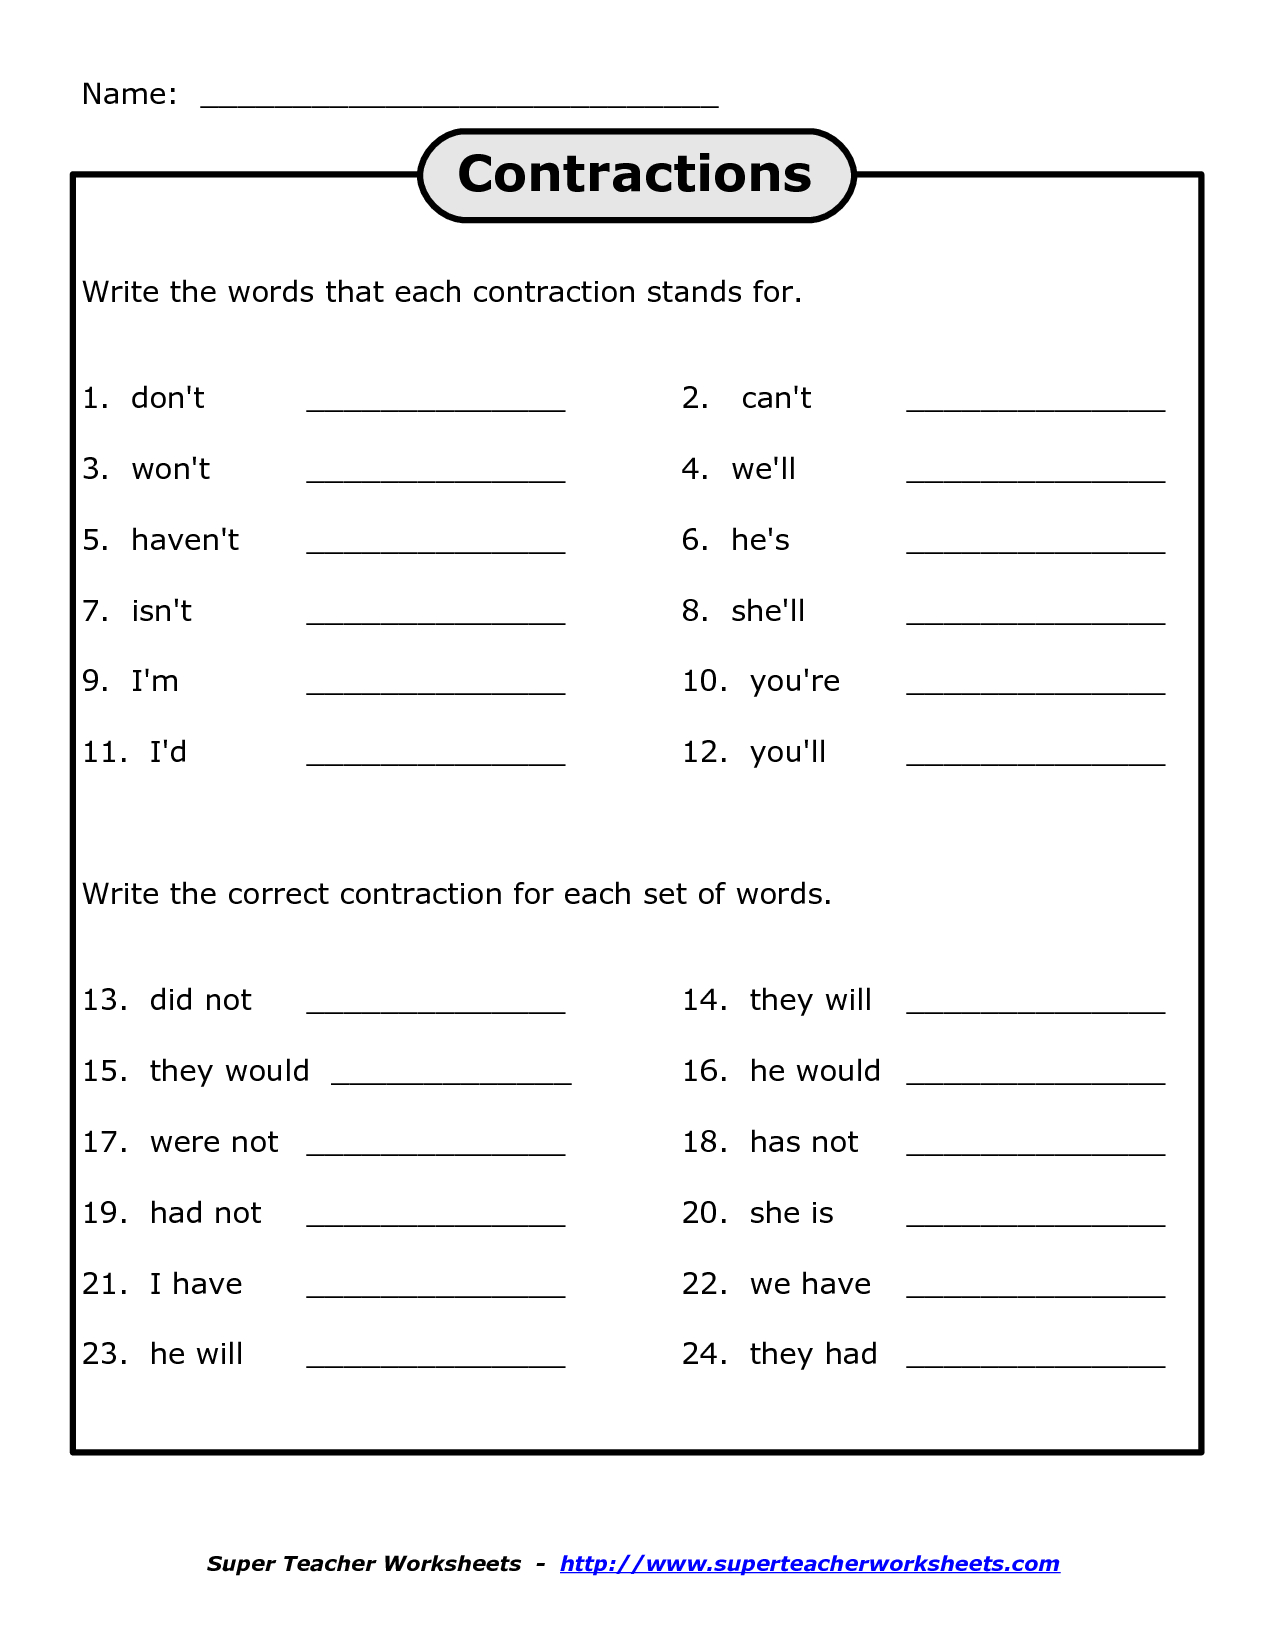 Free Printables For 4Th Grade Science | Free Printable Contraction - Printable Puzzles For 4Th Grade